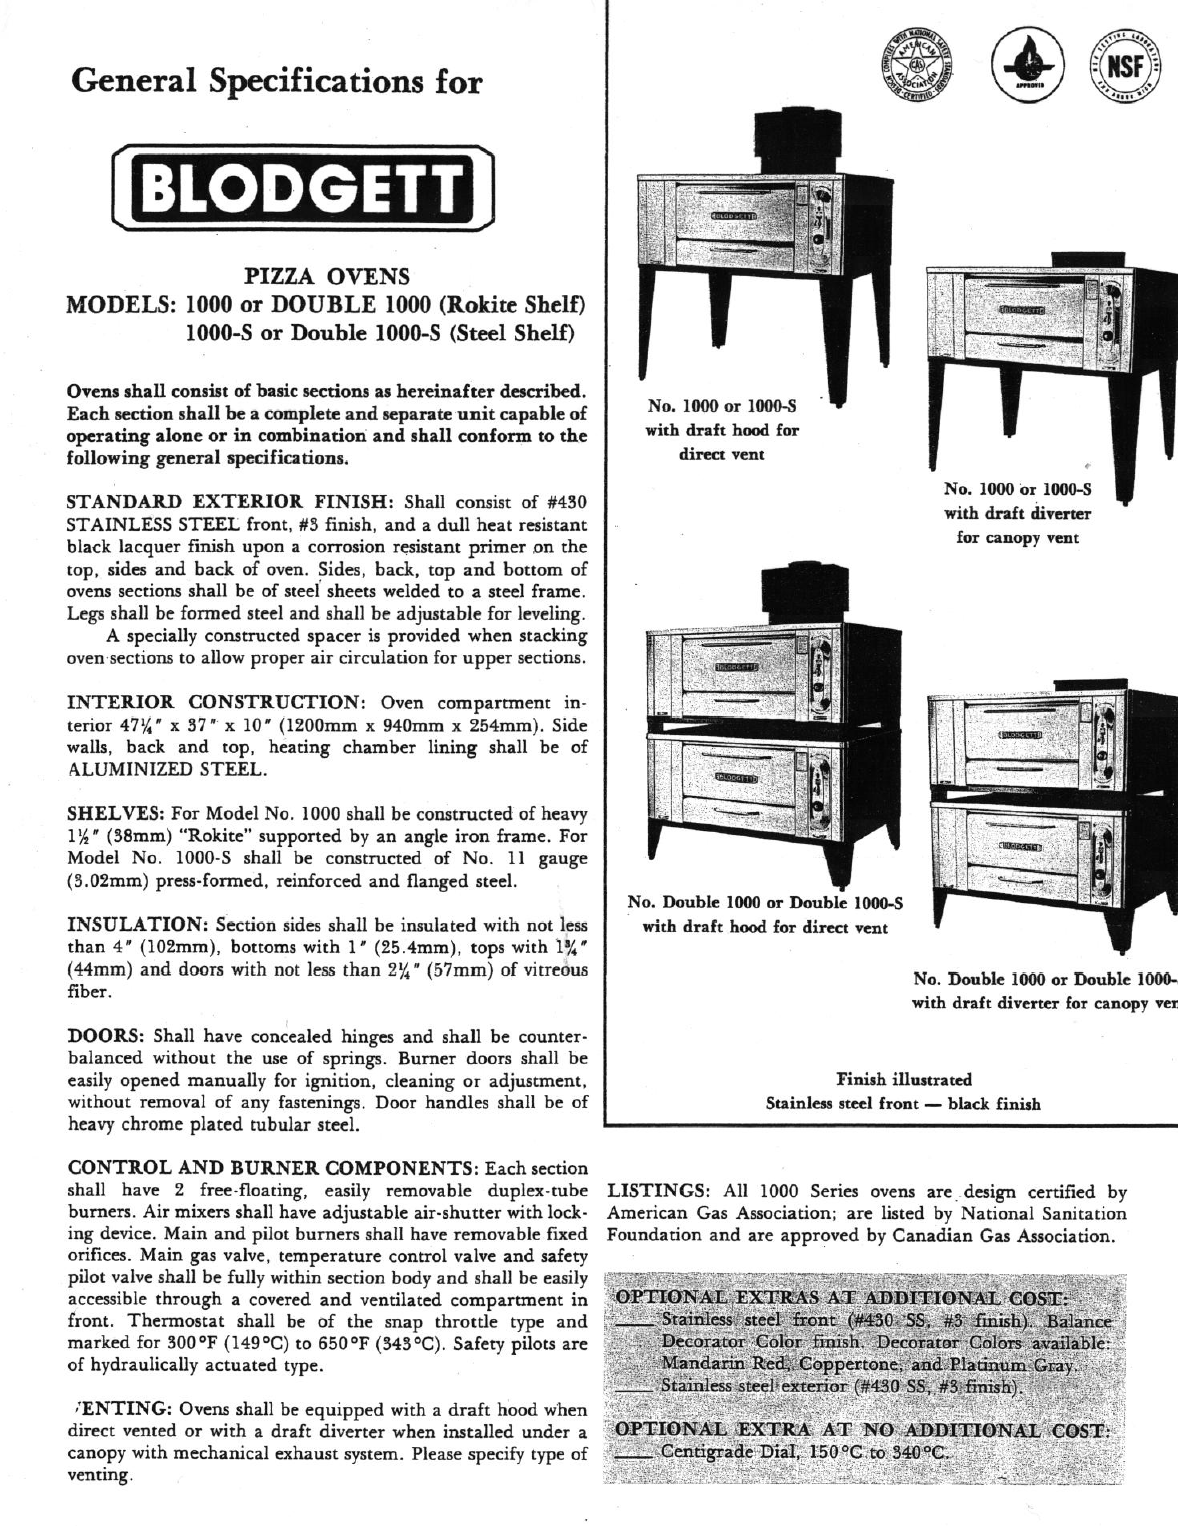 Where can you purchase Blodgett ovens?